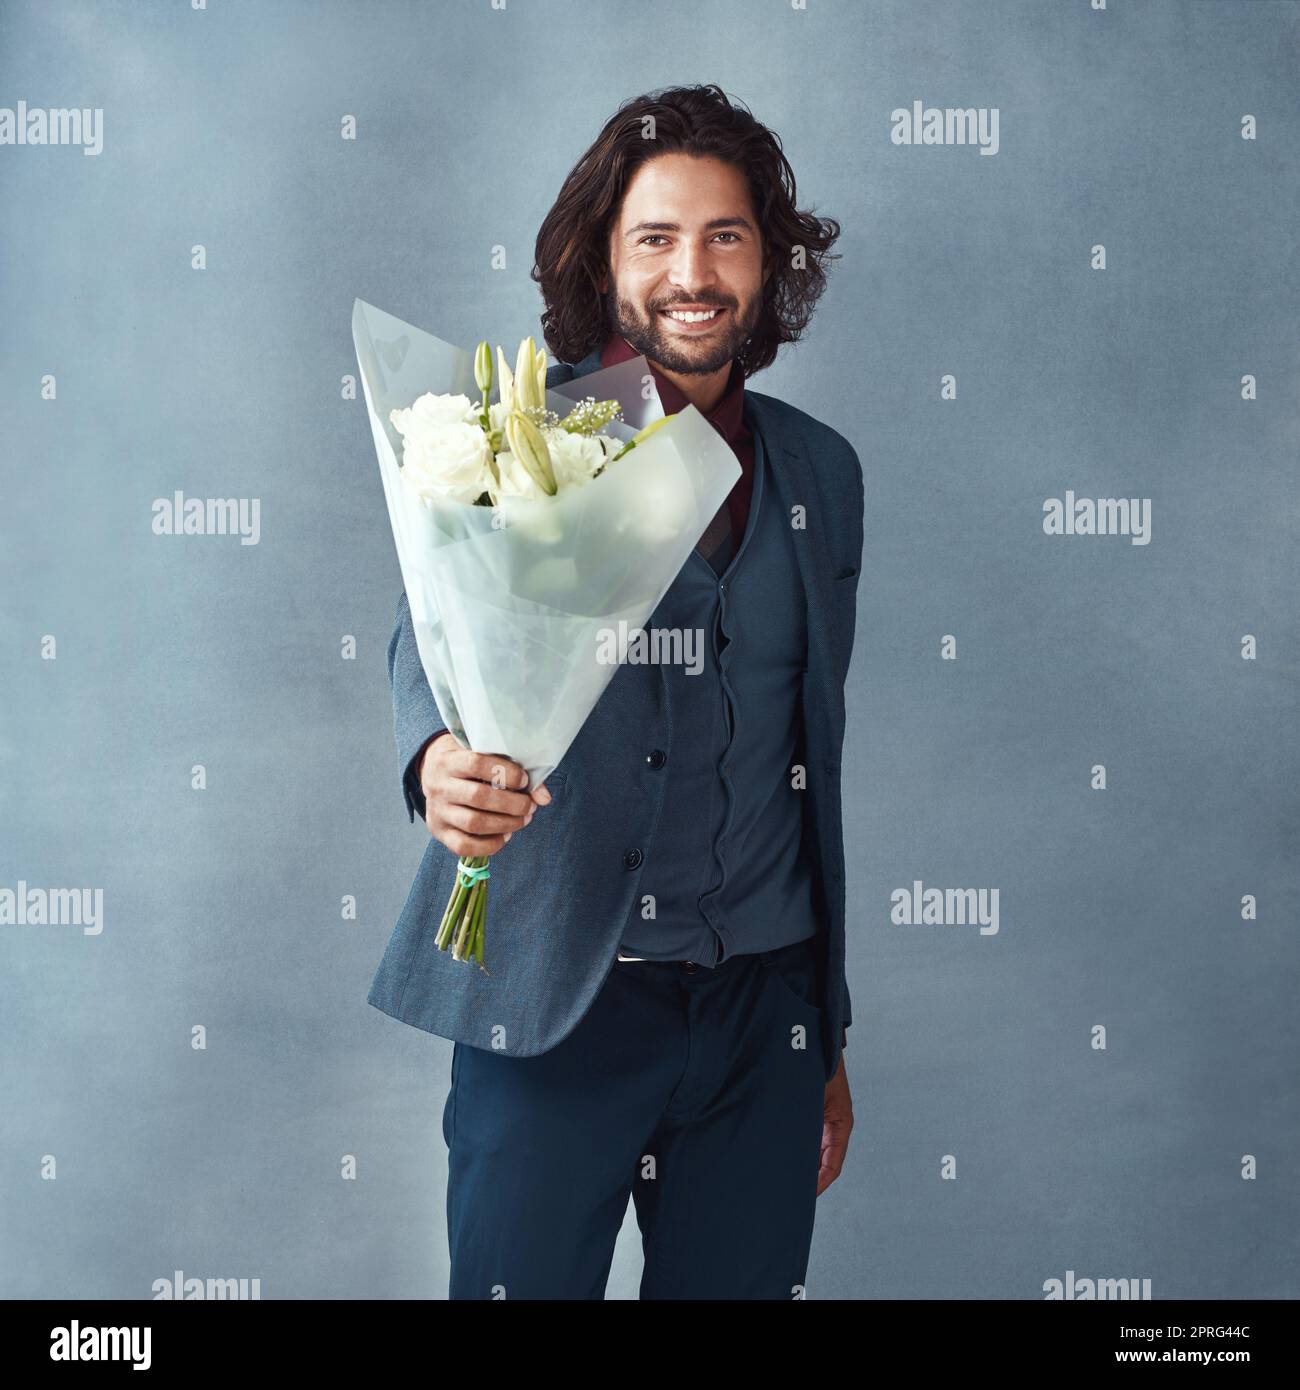 He knows how to turn up the romance. Studio shot of a stylishly dressed handsome young man holding a bouquet of flowers against a gray background. Stock Photo